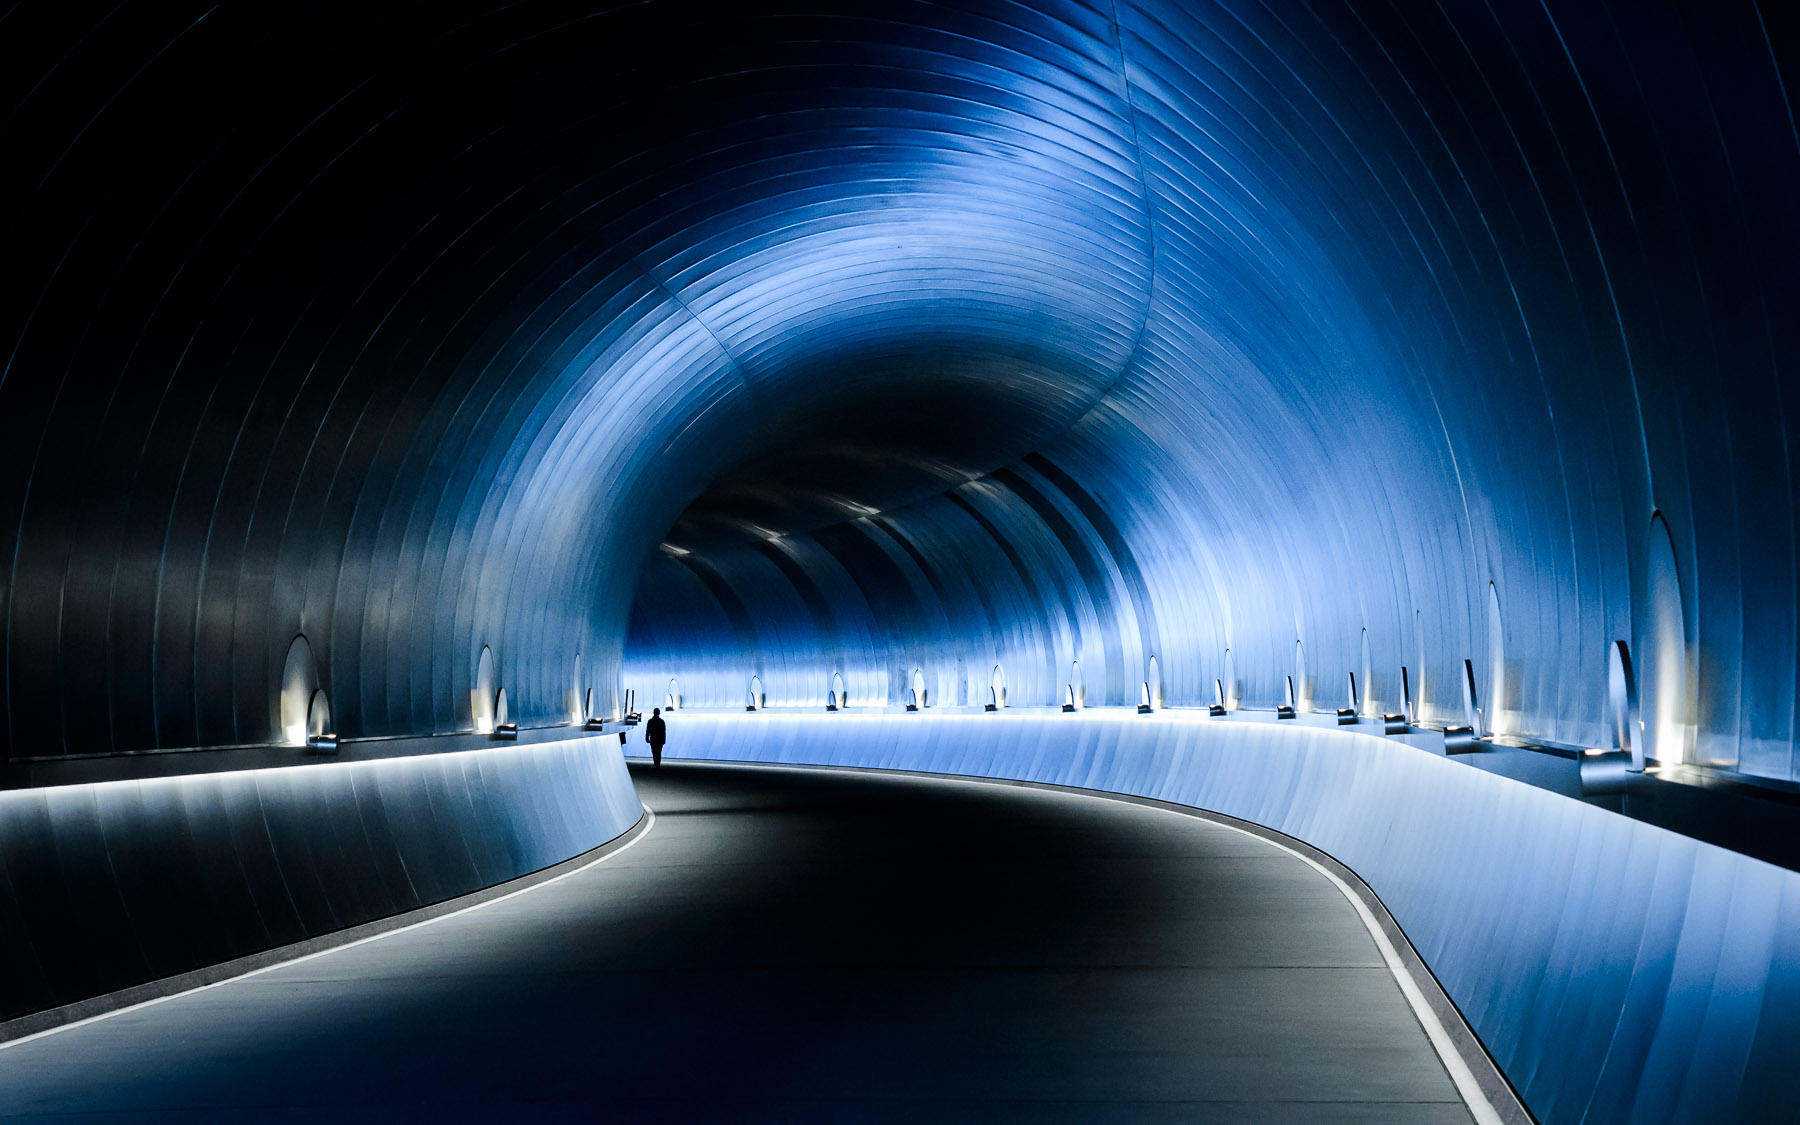 Jeffrey Friedl's Blog » Visiting the Miho Museum an Hour out of Kyoto